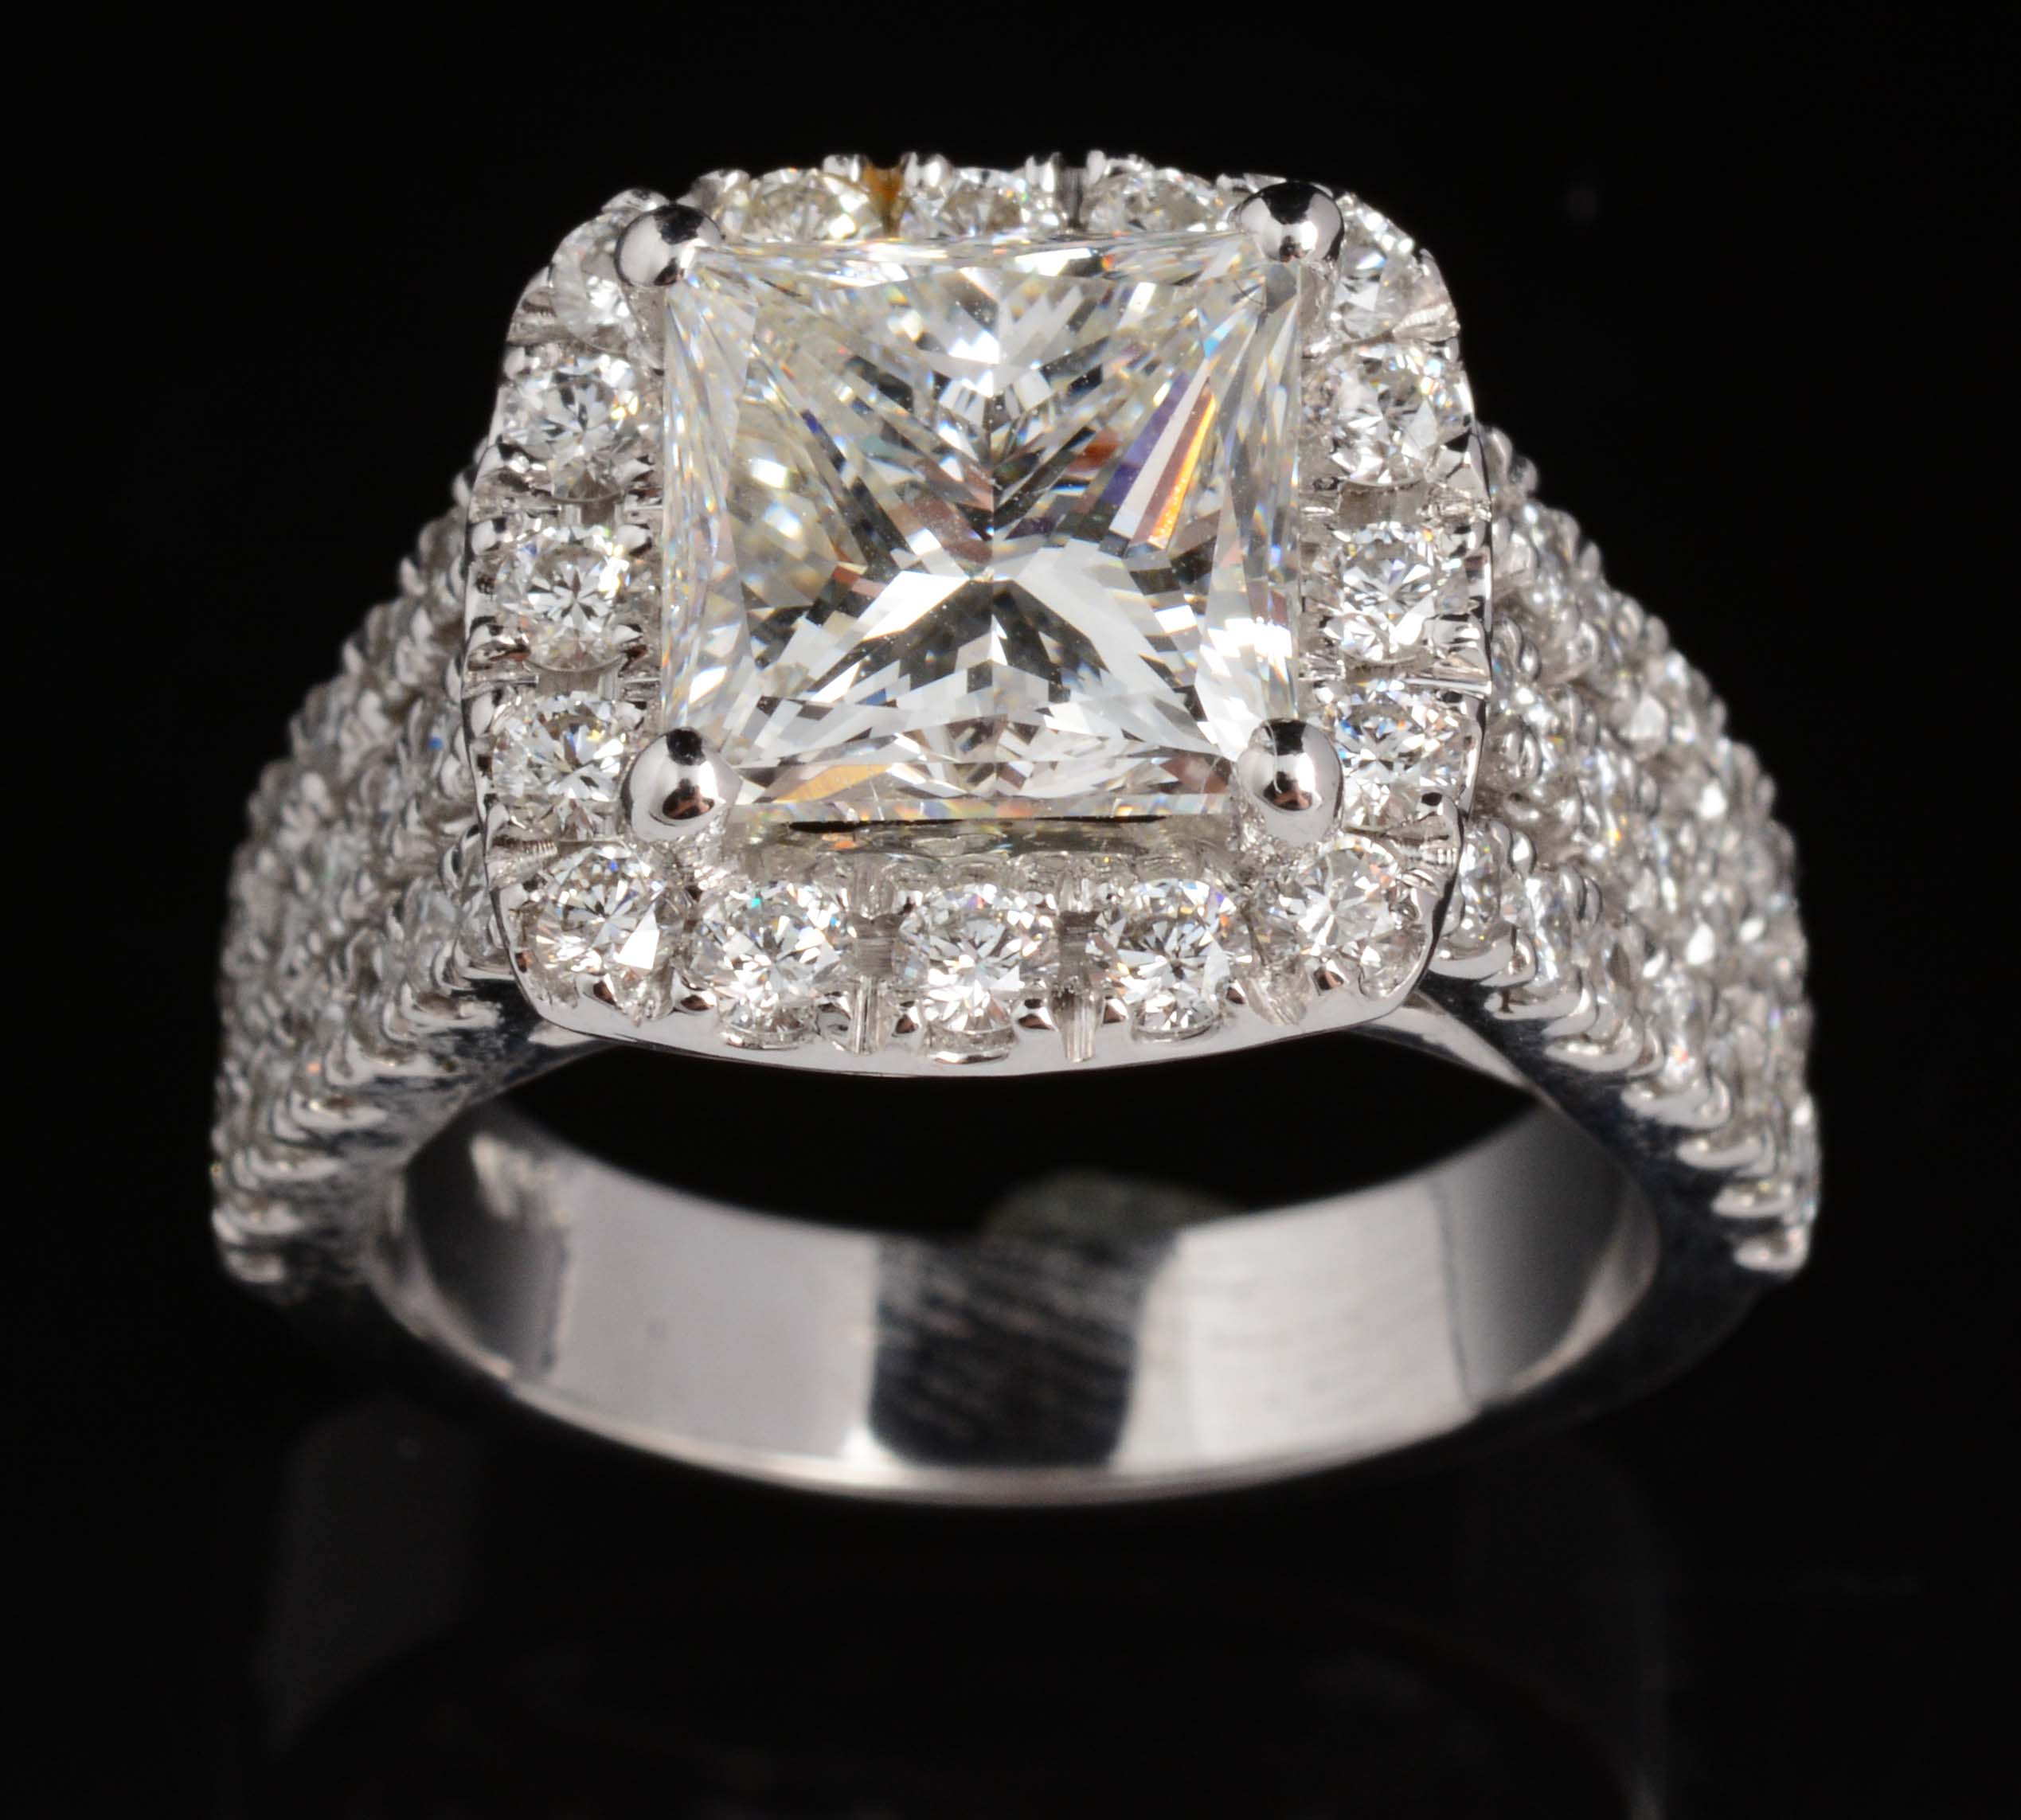 14K White Gold and 3.02 Carat Diamond Ring, estimated at $30,000-50,000.